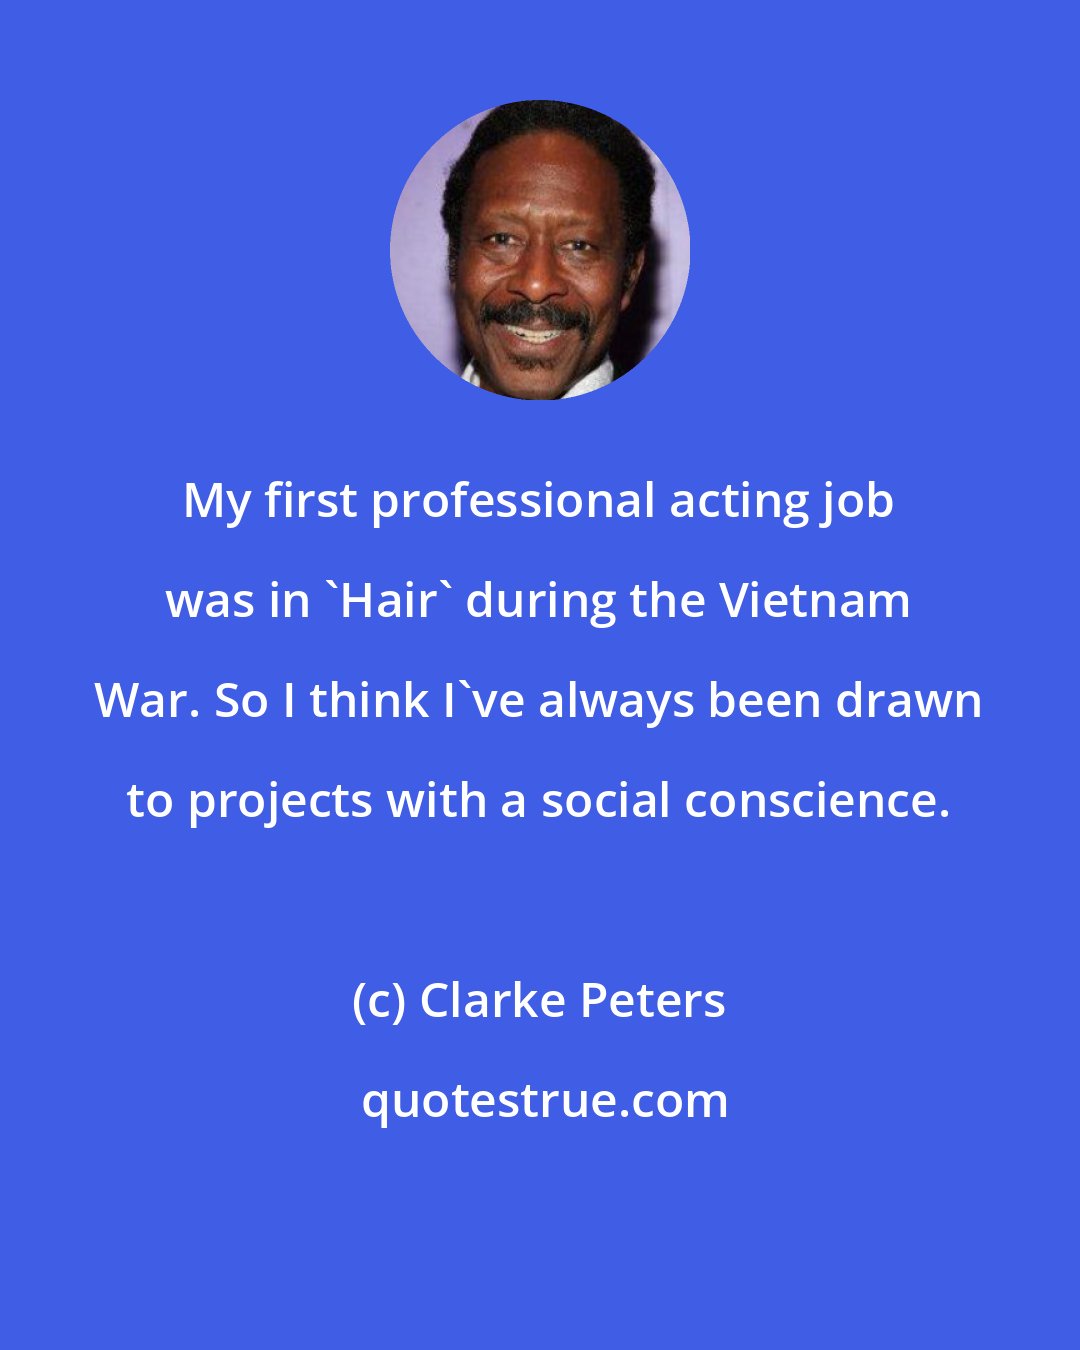 Clarke Peters: My first professional acting job was in 'Hair' during the Vietnam War. So I think I've always been drawn to projects with a social conscience.